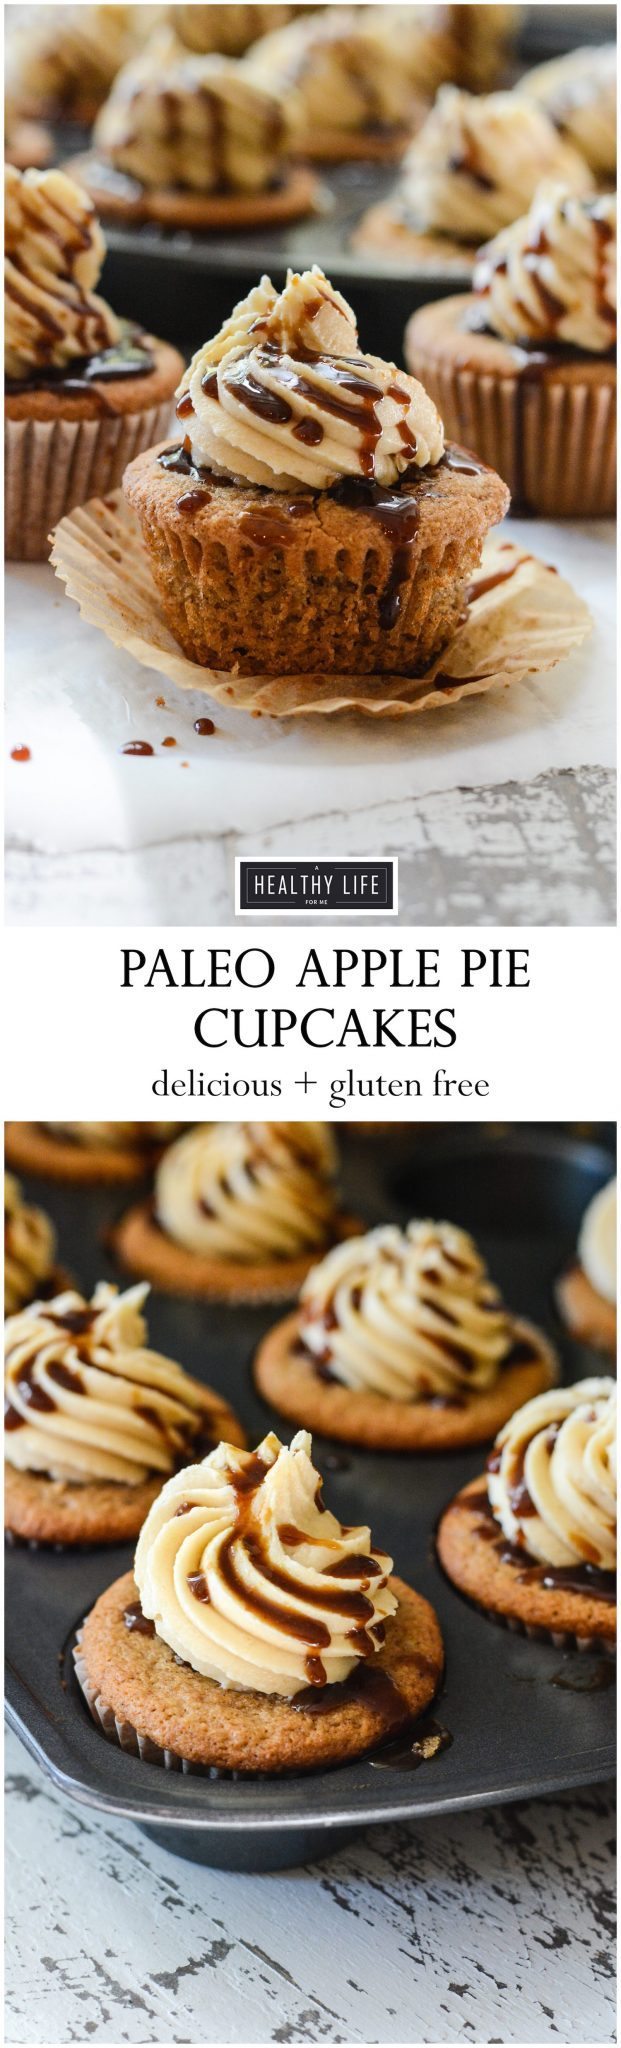 A collage of two images of apple pie cupcakes with a label introducing the dessert in between the photos